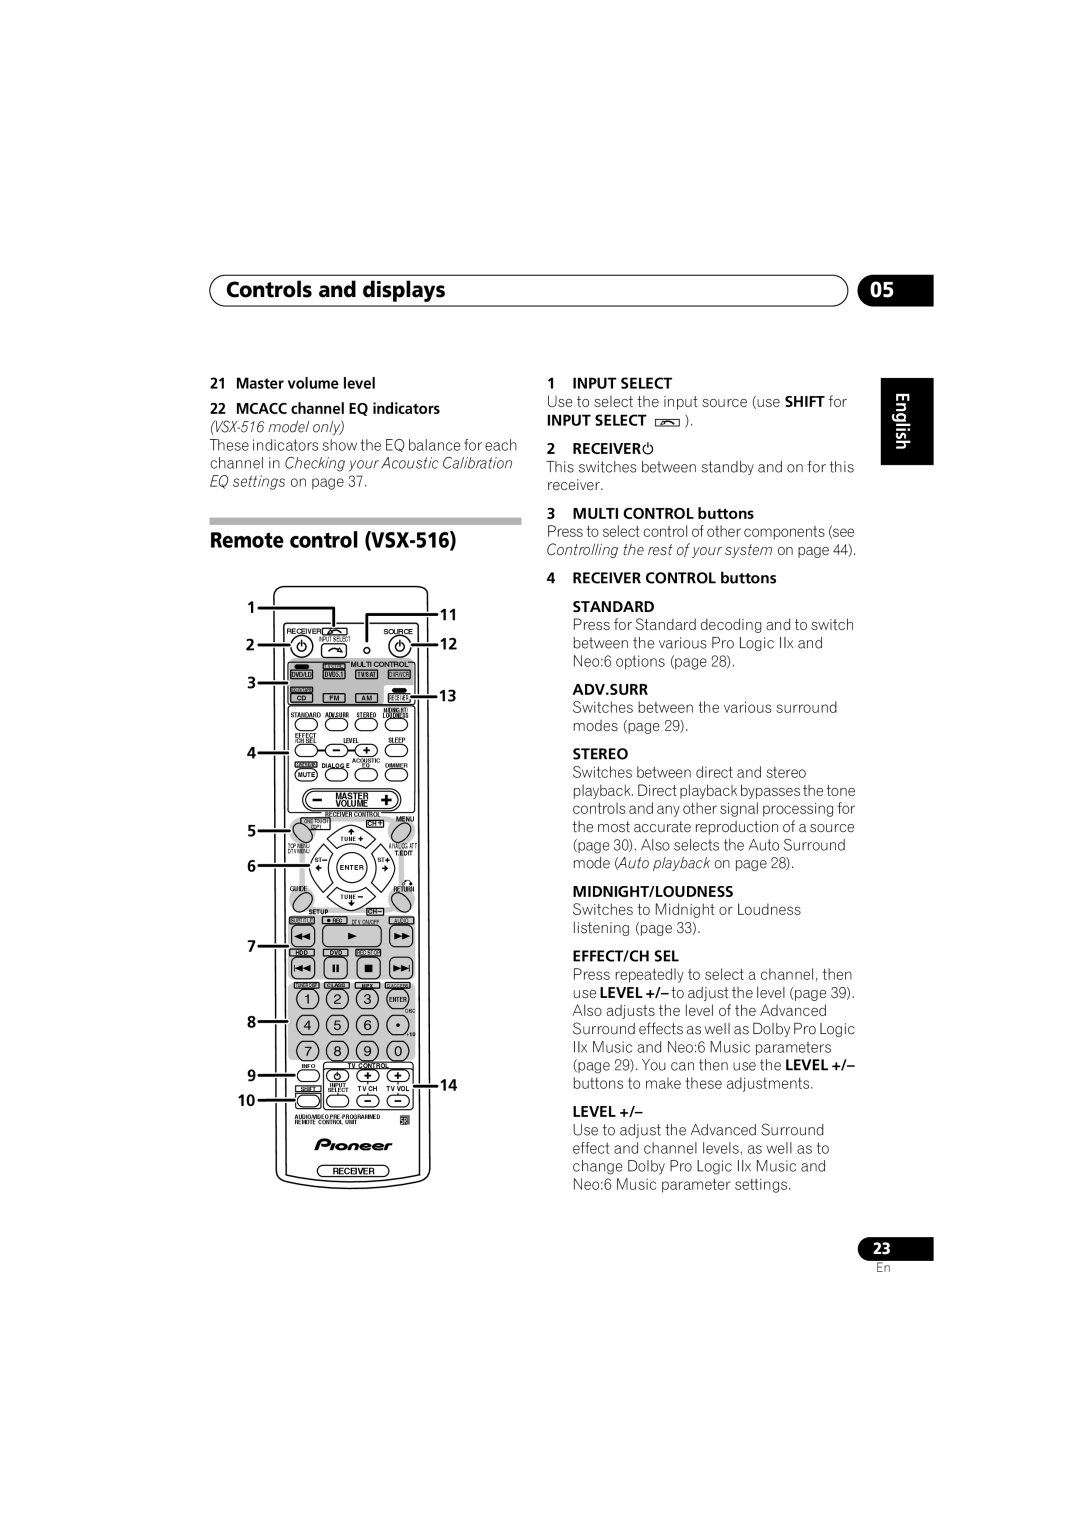 Pioneer VSX-516-S/-K operating instructions Remote control VSX-516, Controls and displays 